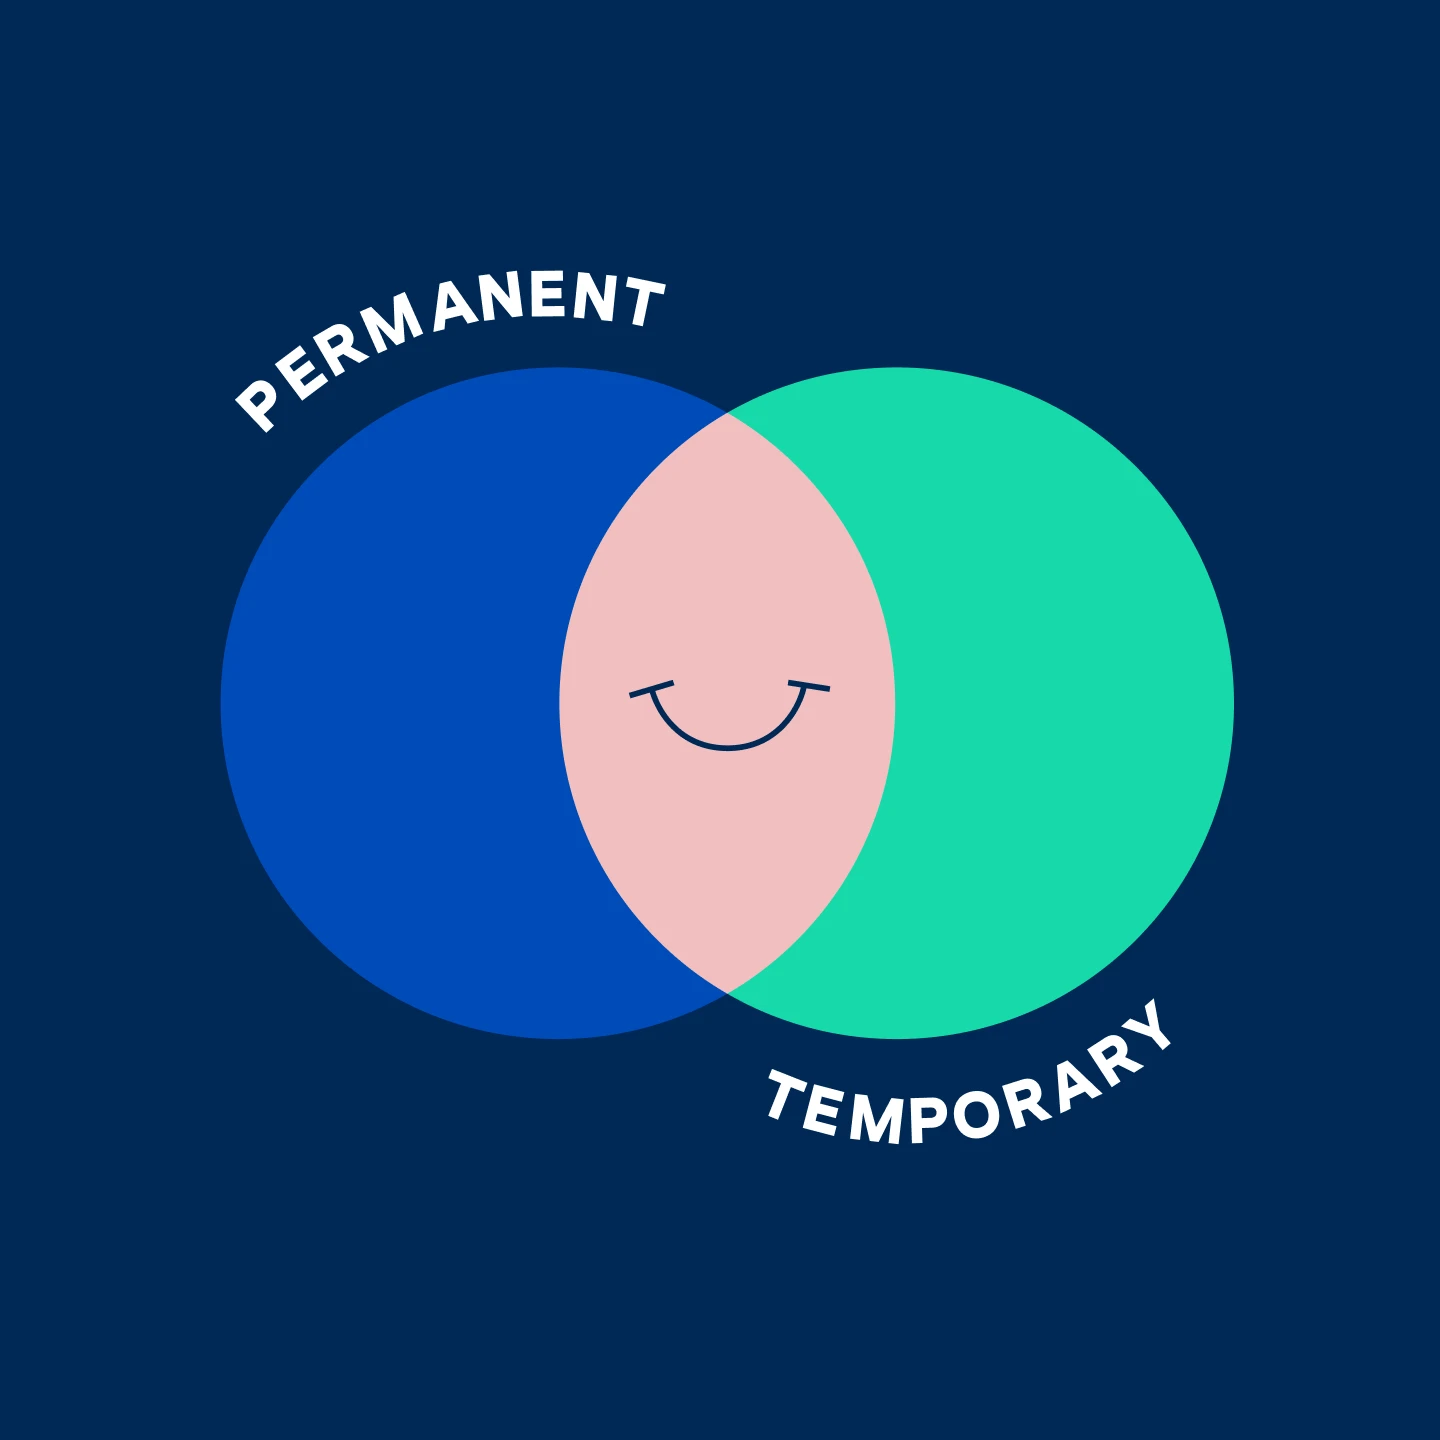 Venn diagram showing the overlap of permanent and temporary categories displaying when to transition from temporary to permanent dentures.